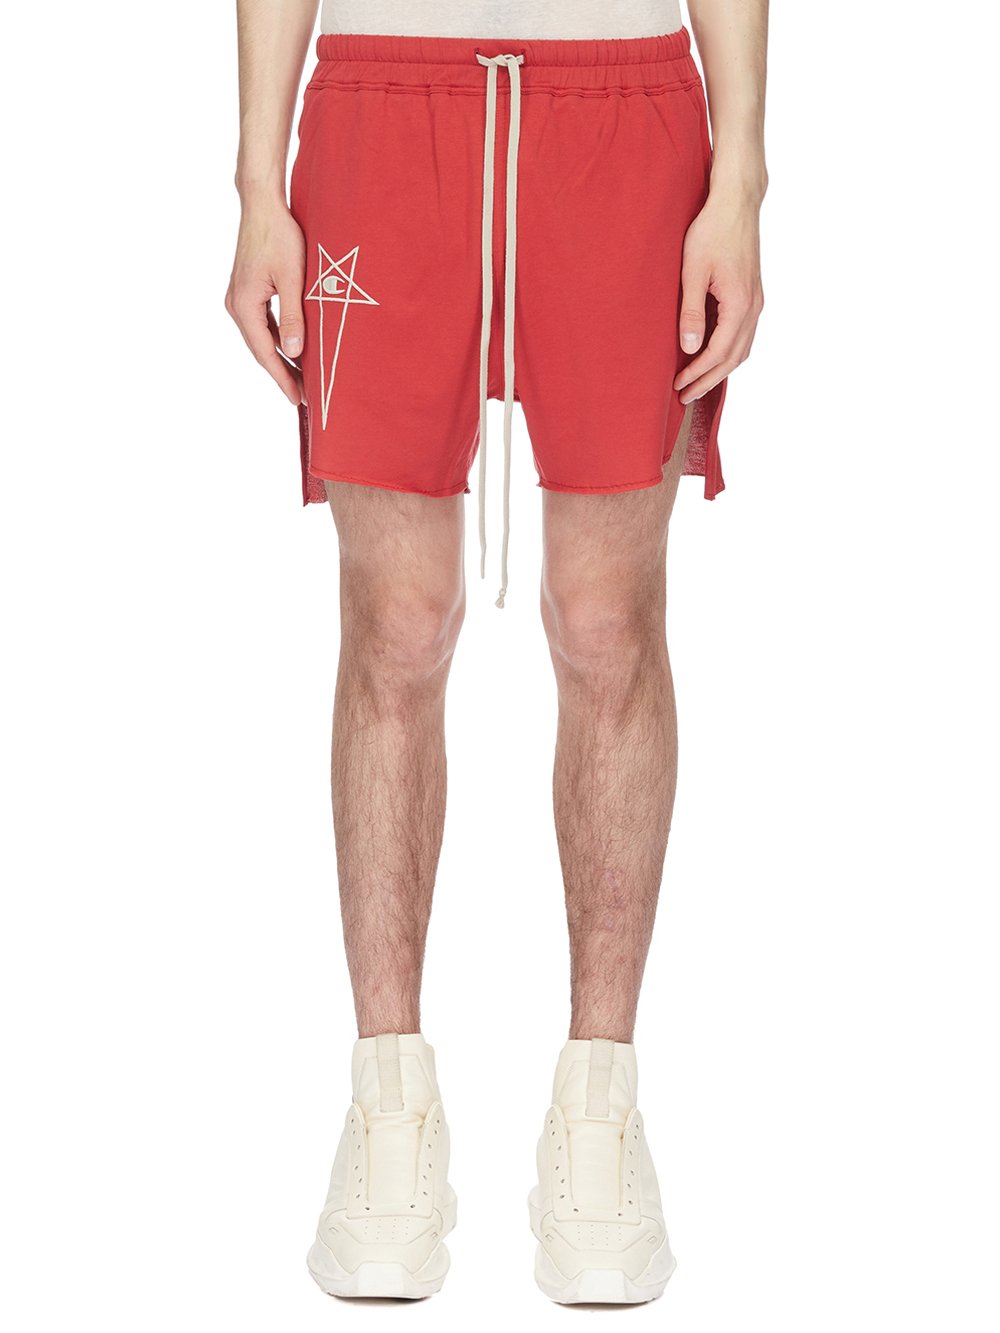 CHAMPION X RICK OWENS DOLPHIN BOXERS IN CARNELIAN RED MEDIUM WEIGHT COTTON JERSEY 